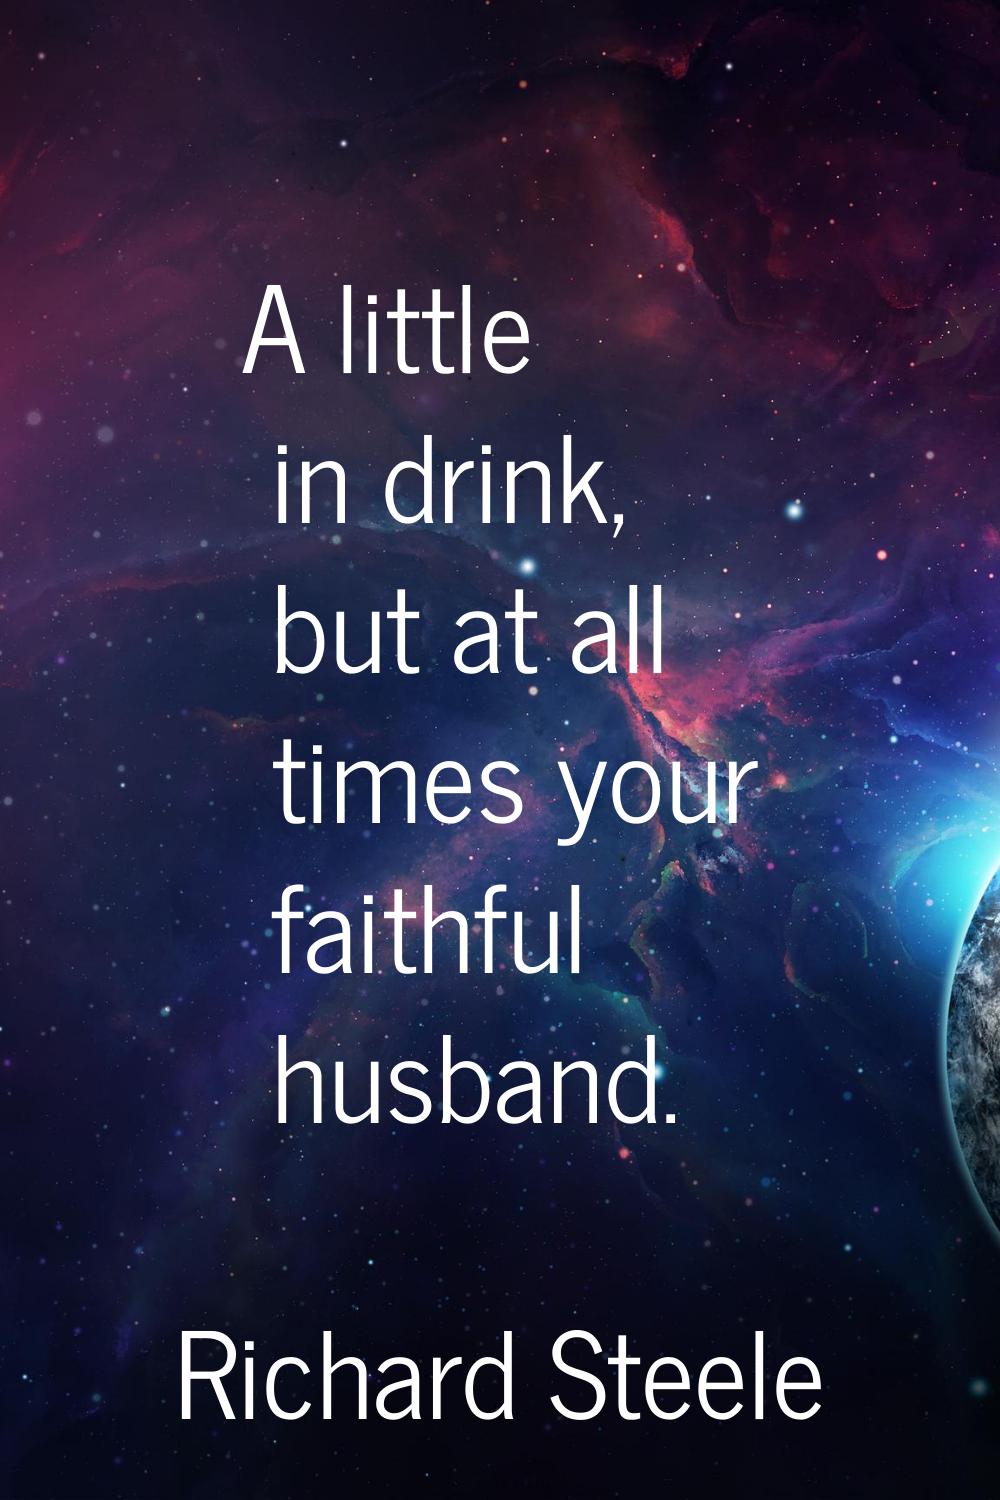 A little in drink, but at all times your faithful husband.